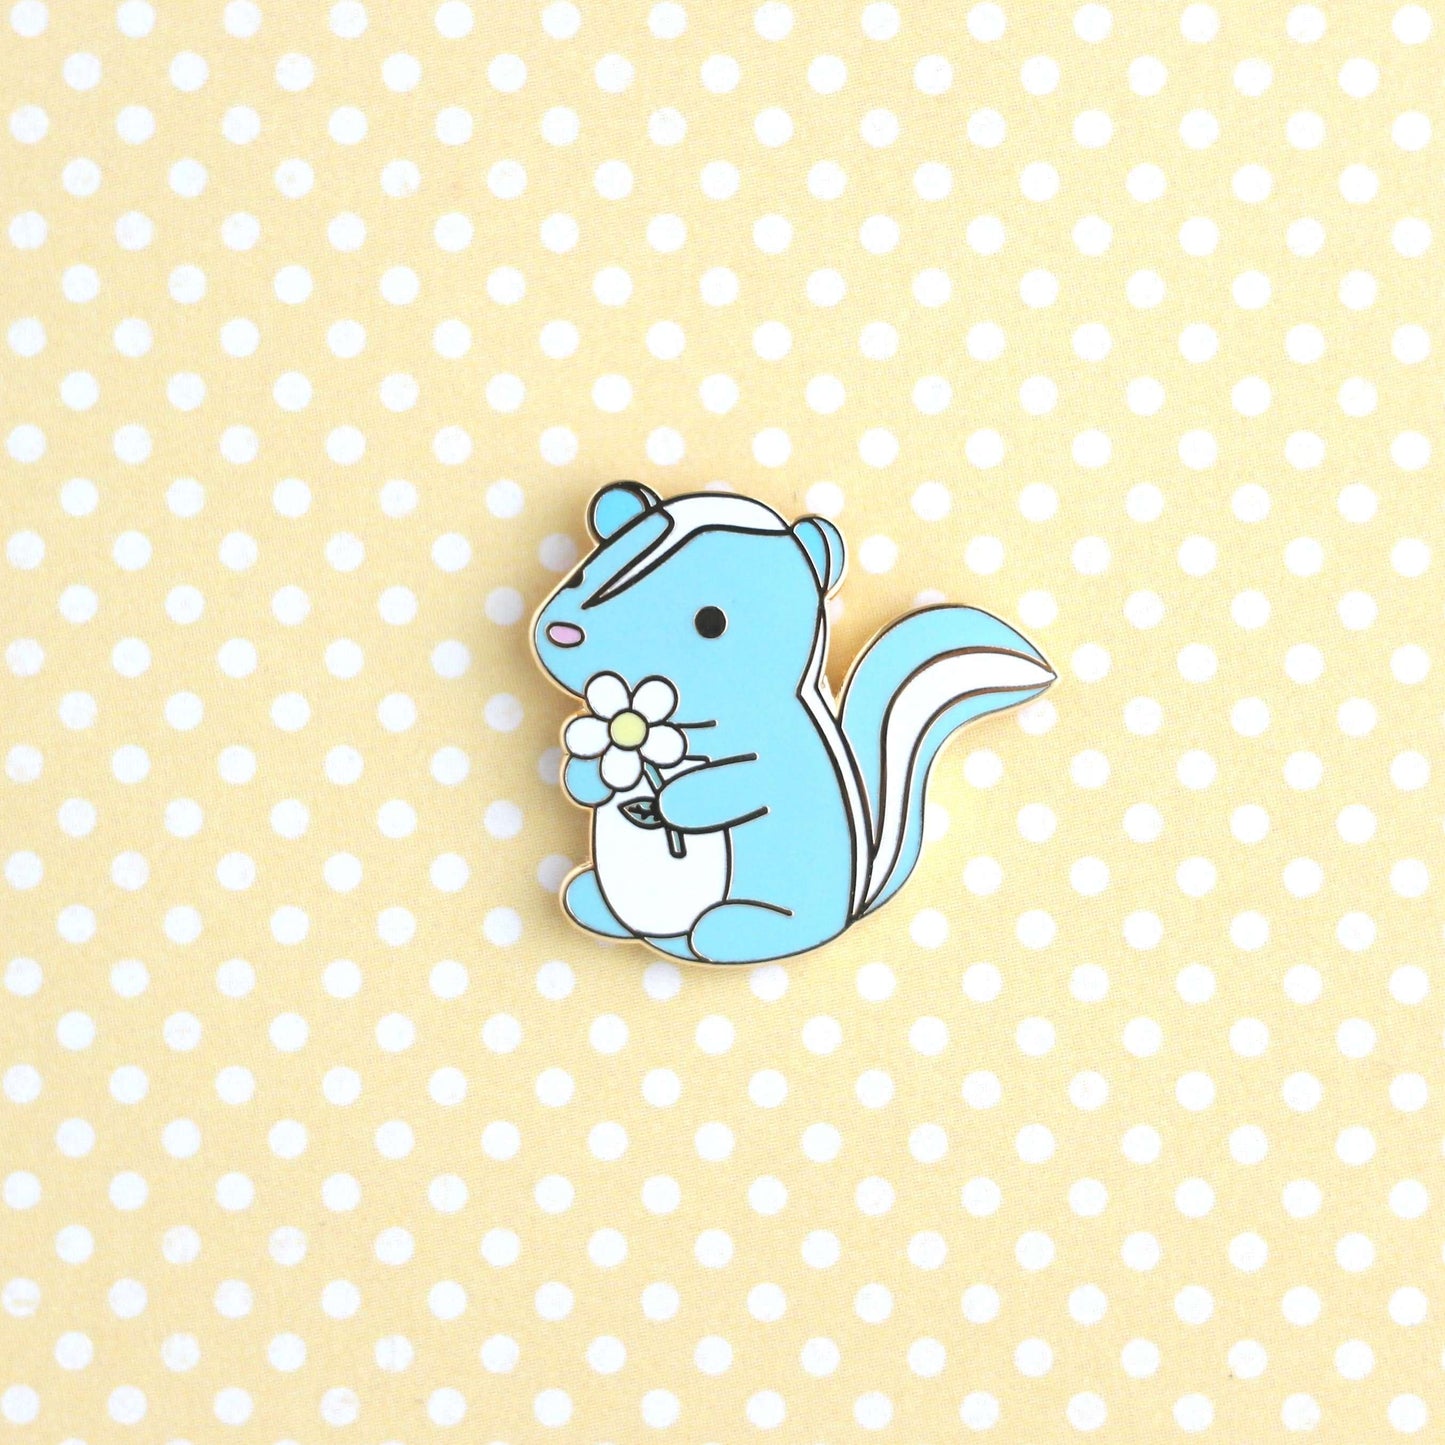 Skunk and Daisy Enamel Pin (Turquoise Variant) - Backpack Pin - Cute Skunk Pin by Wild Whimsy Woolies